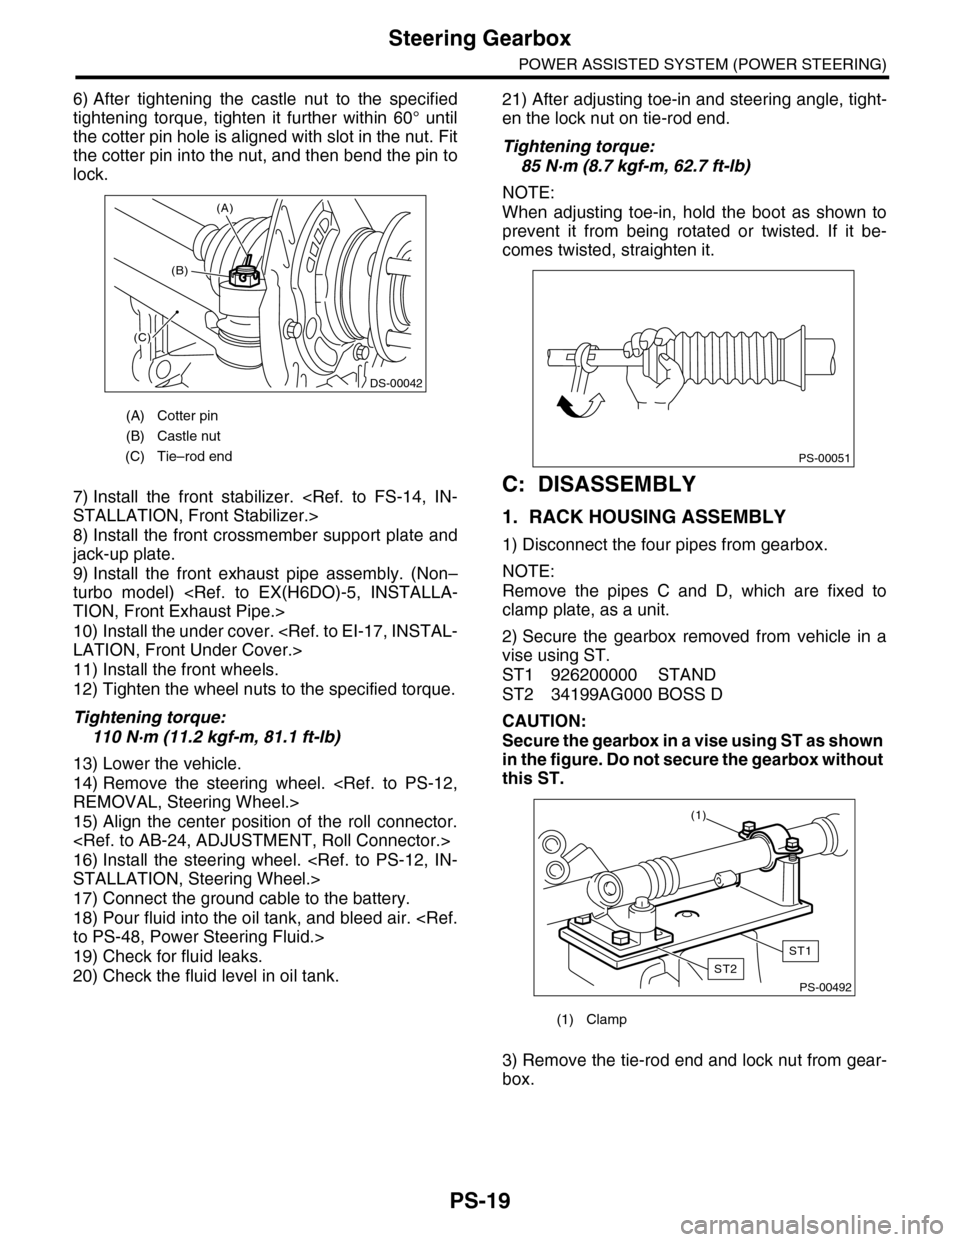 SUBARU TRIBECA 2009 1.G Service Workshop Manual PS-19
Steering Gearbox
POWER ASSISTED SYSTEM (POWER STEERING)
6) After  tightening  the  castle  nut  to  the  specified
tightening  torque,  tighten  it  further  within  60°  until
the cotter pin h